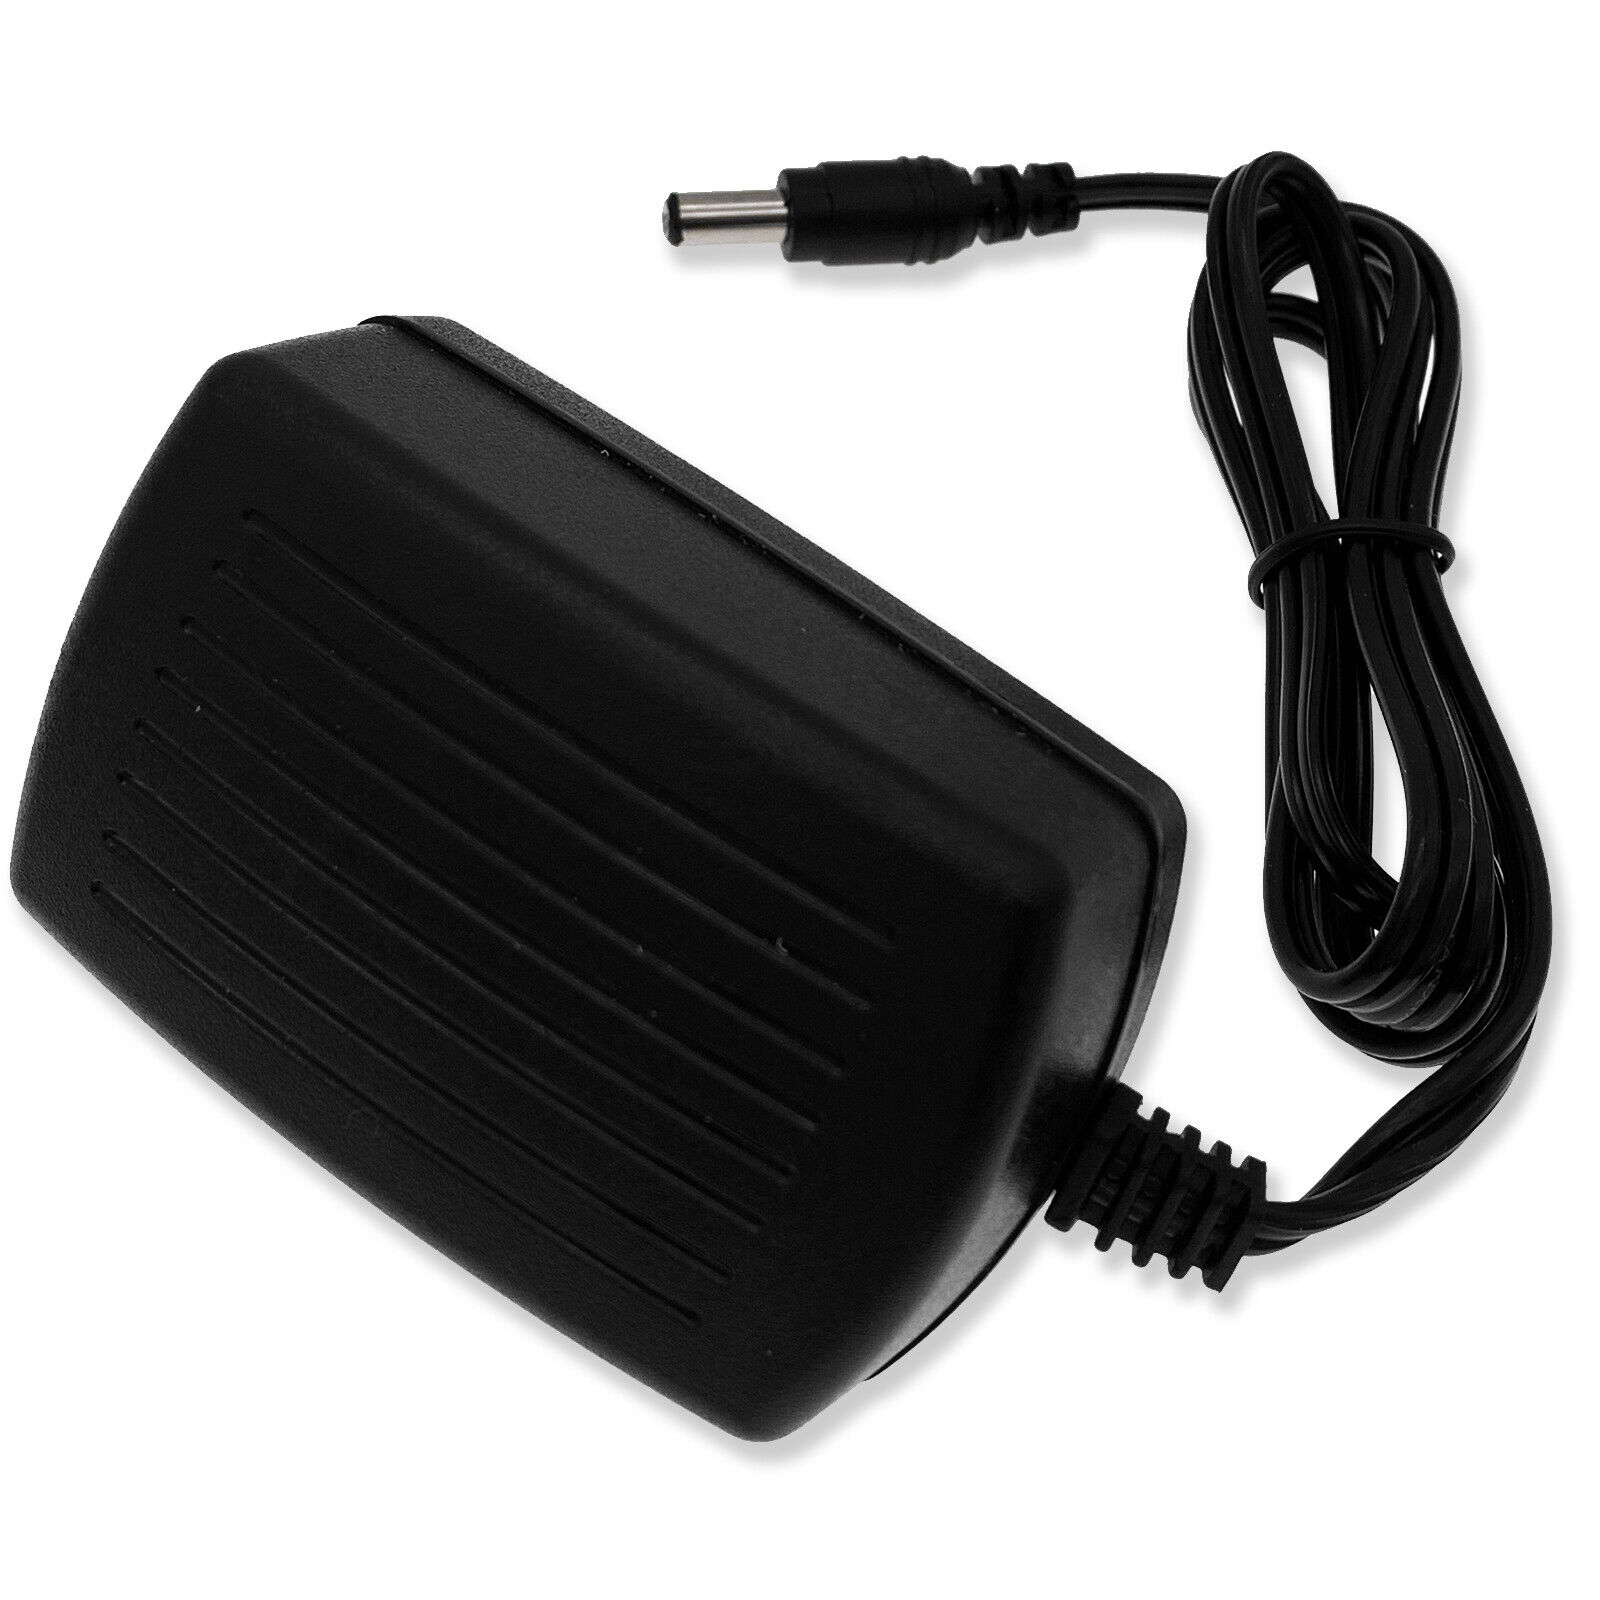 Charger for 24V Epson Perfection Flatbed Photo Scanner V500 V600 V700 V750 V800 V850 PRO 3170 J221A J221 J252A J252 B11B